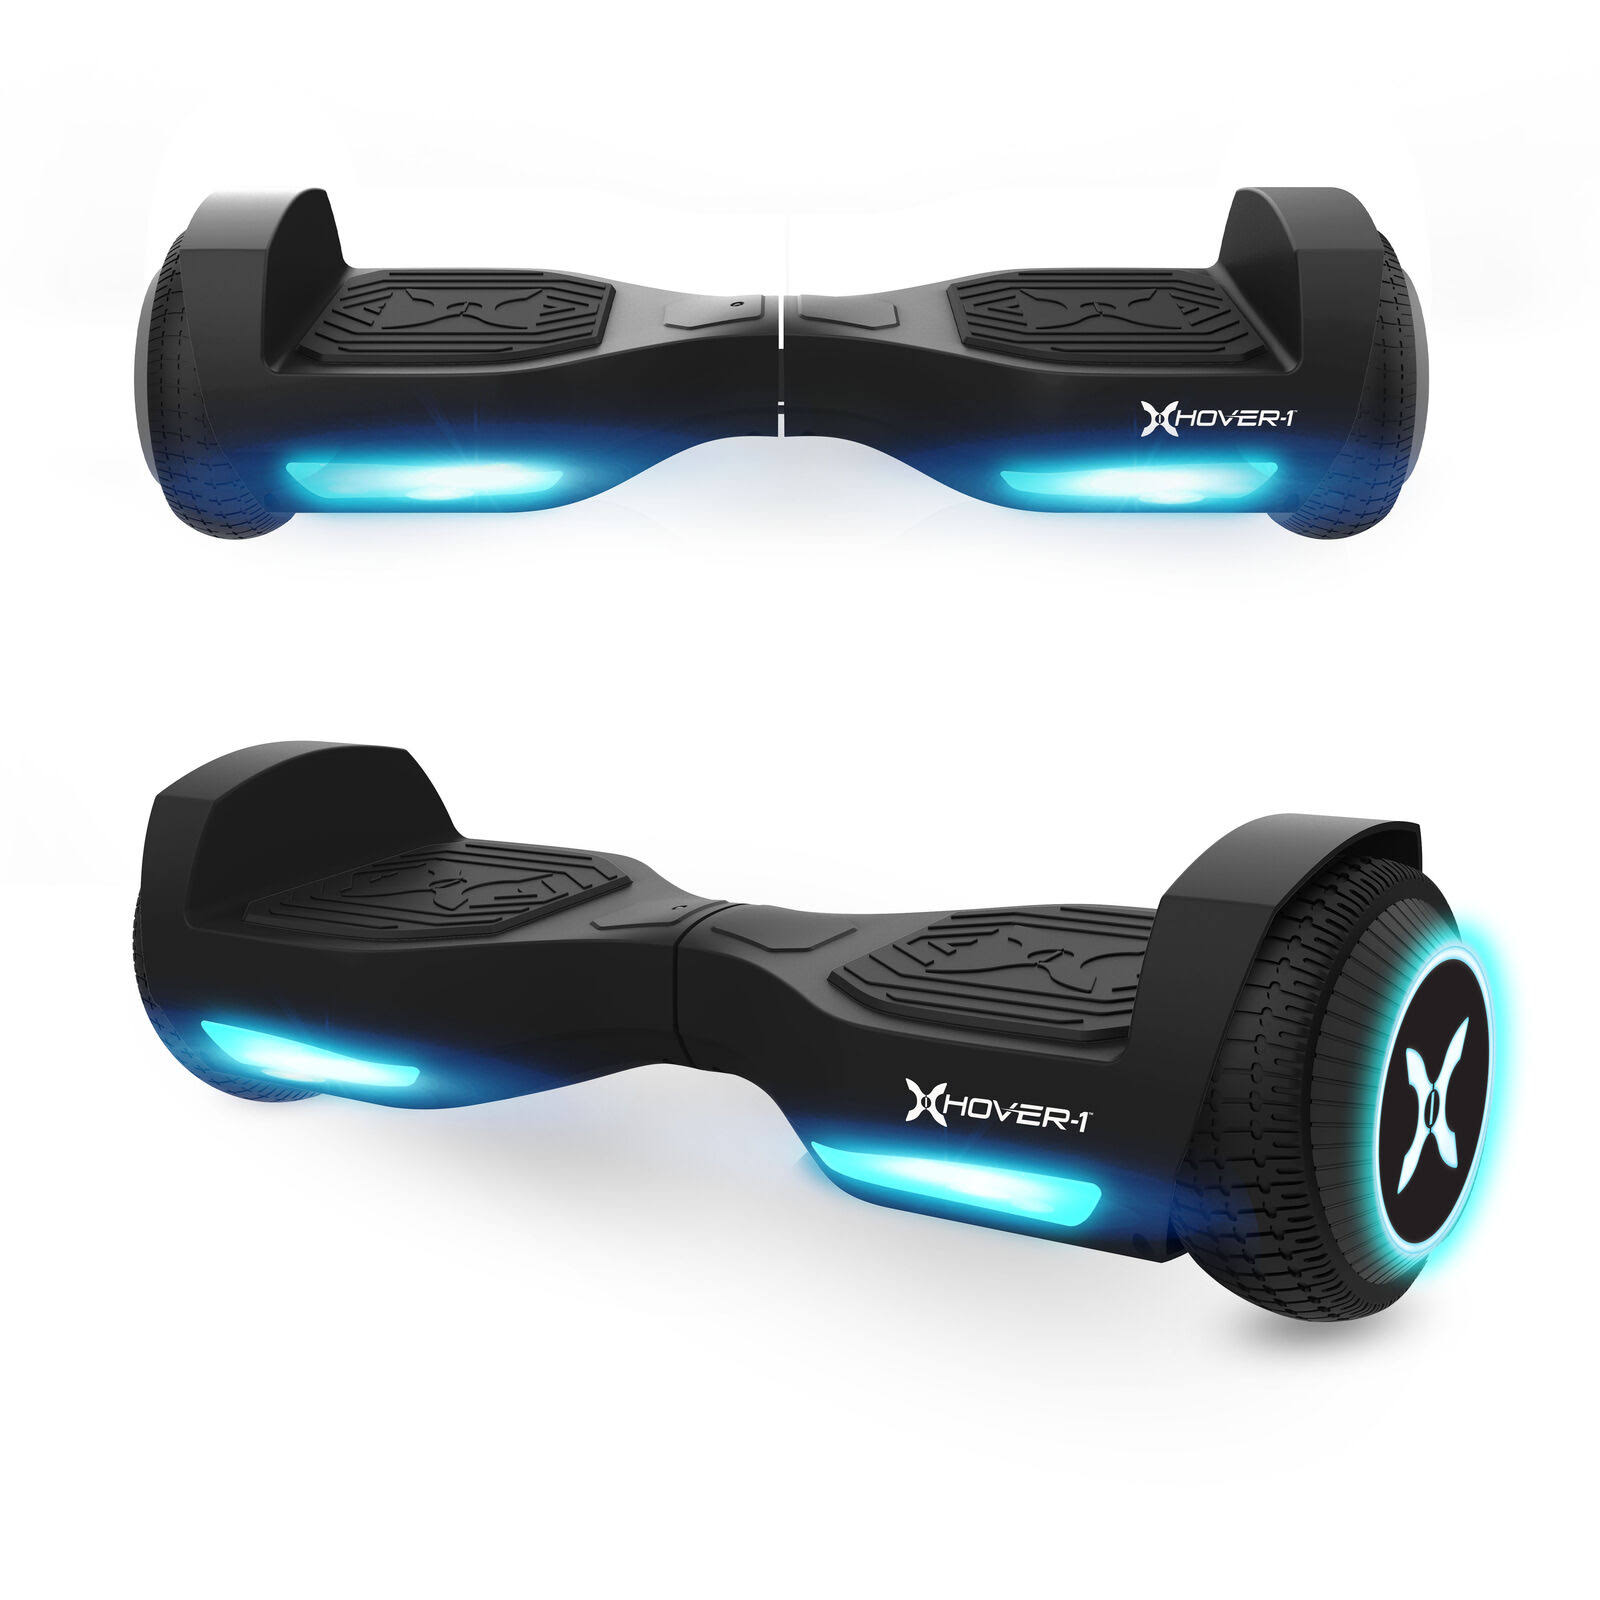 Hover-1 Rebel Kids Hoverboard w/ LED Headlight, 6 M Max Speed, 130 lbs Max Weight, 3 Miles Max Distance  C Black